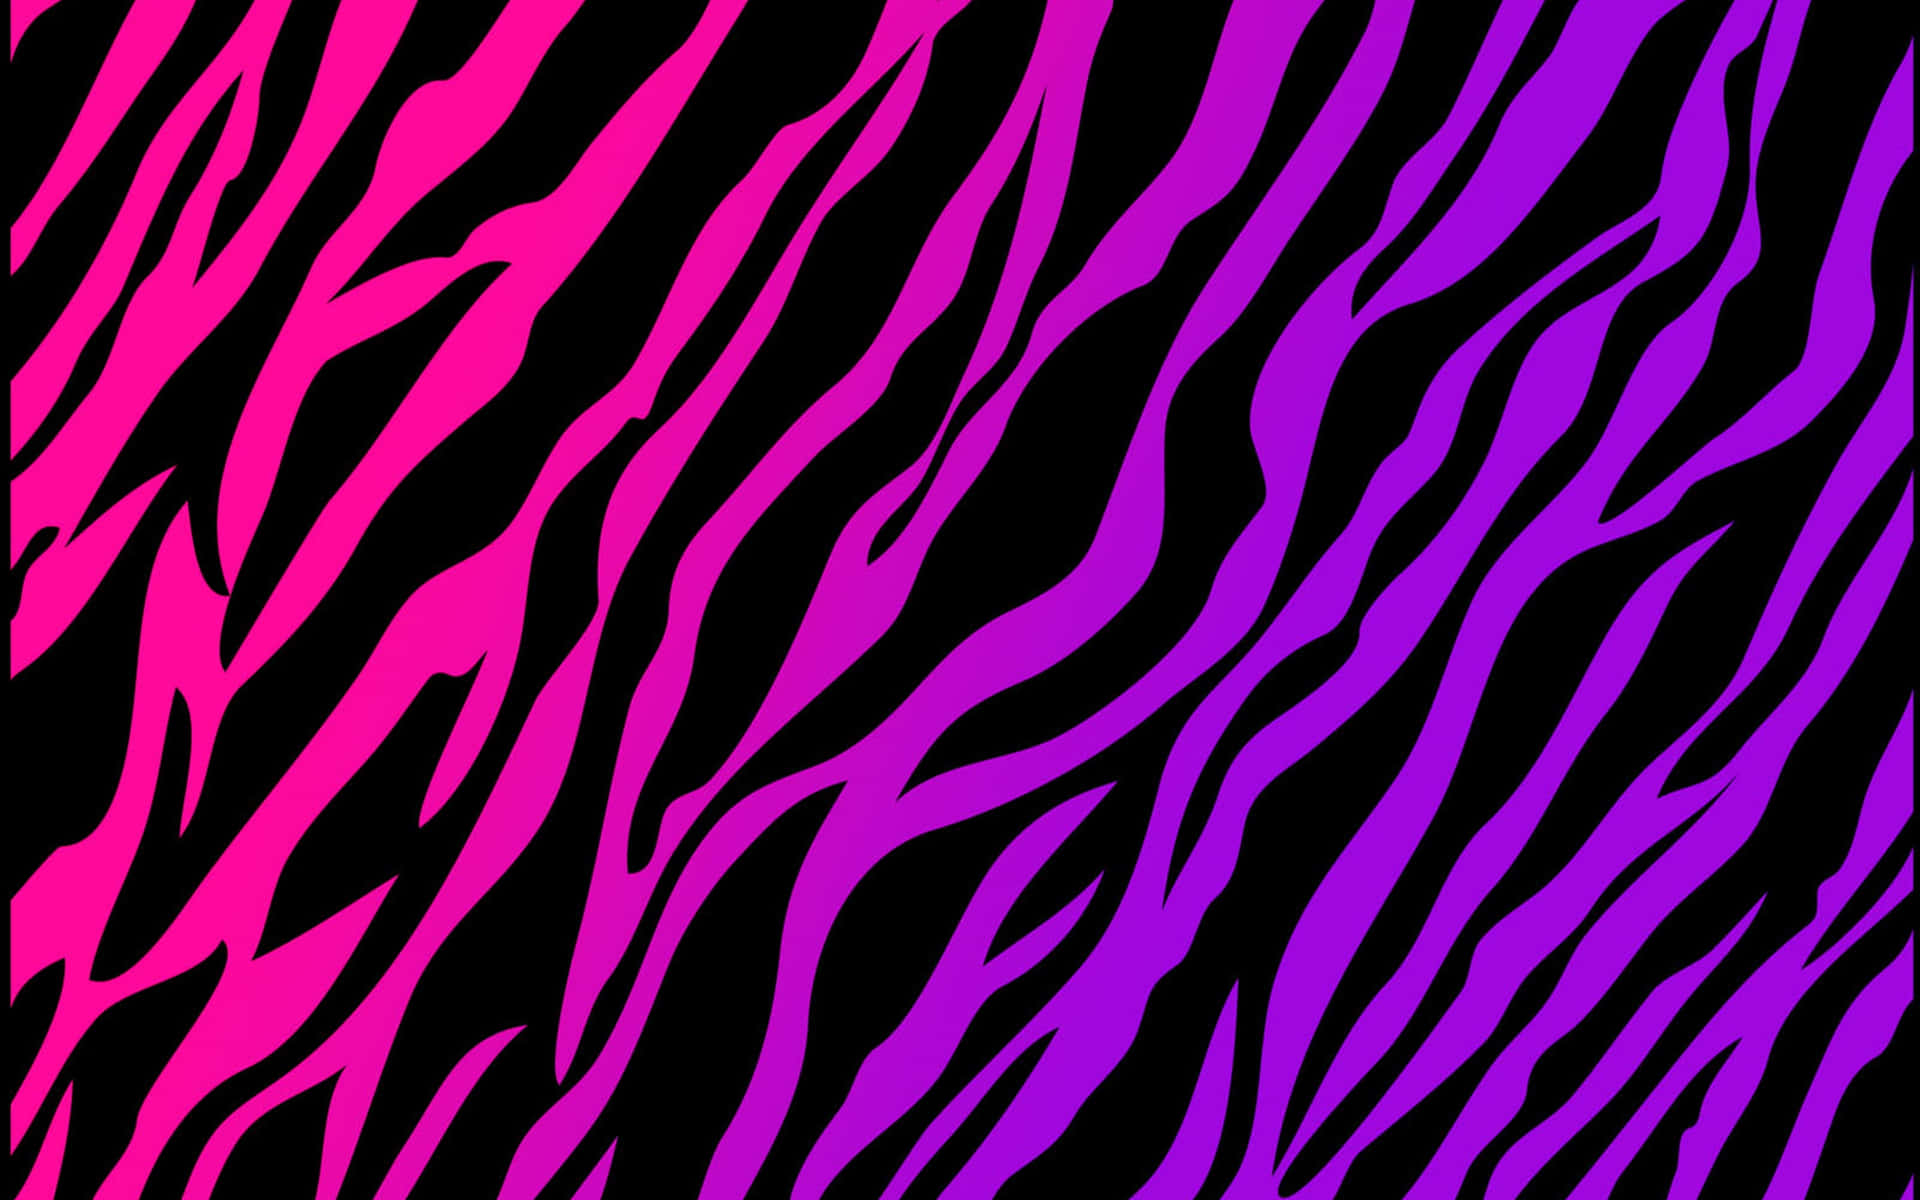 Bright pink abstract background